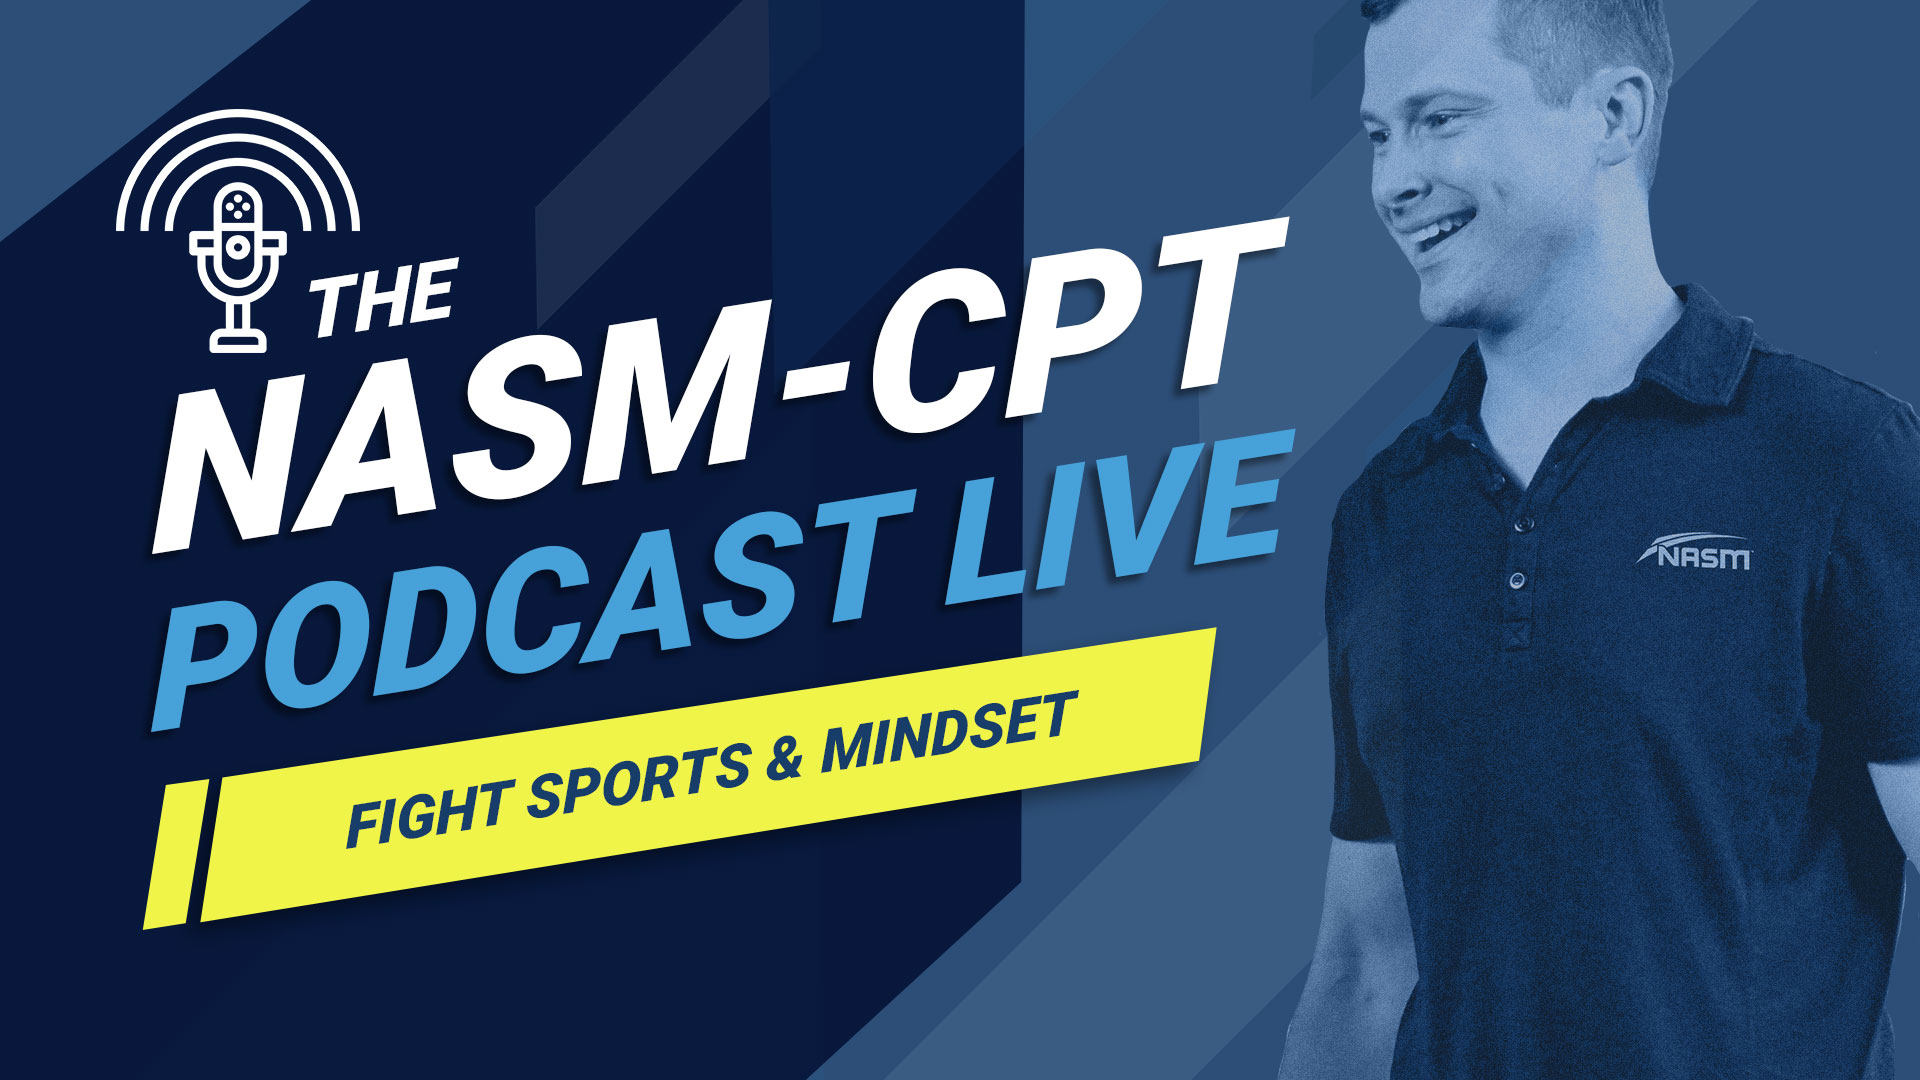 fight sports episode banner for Sportstraining-Weightloss CPT podcast